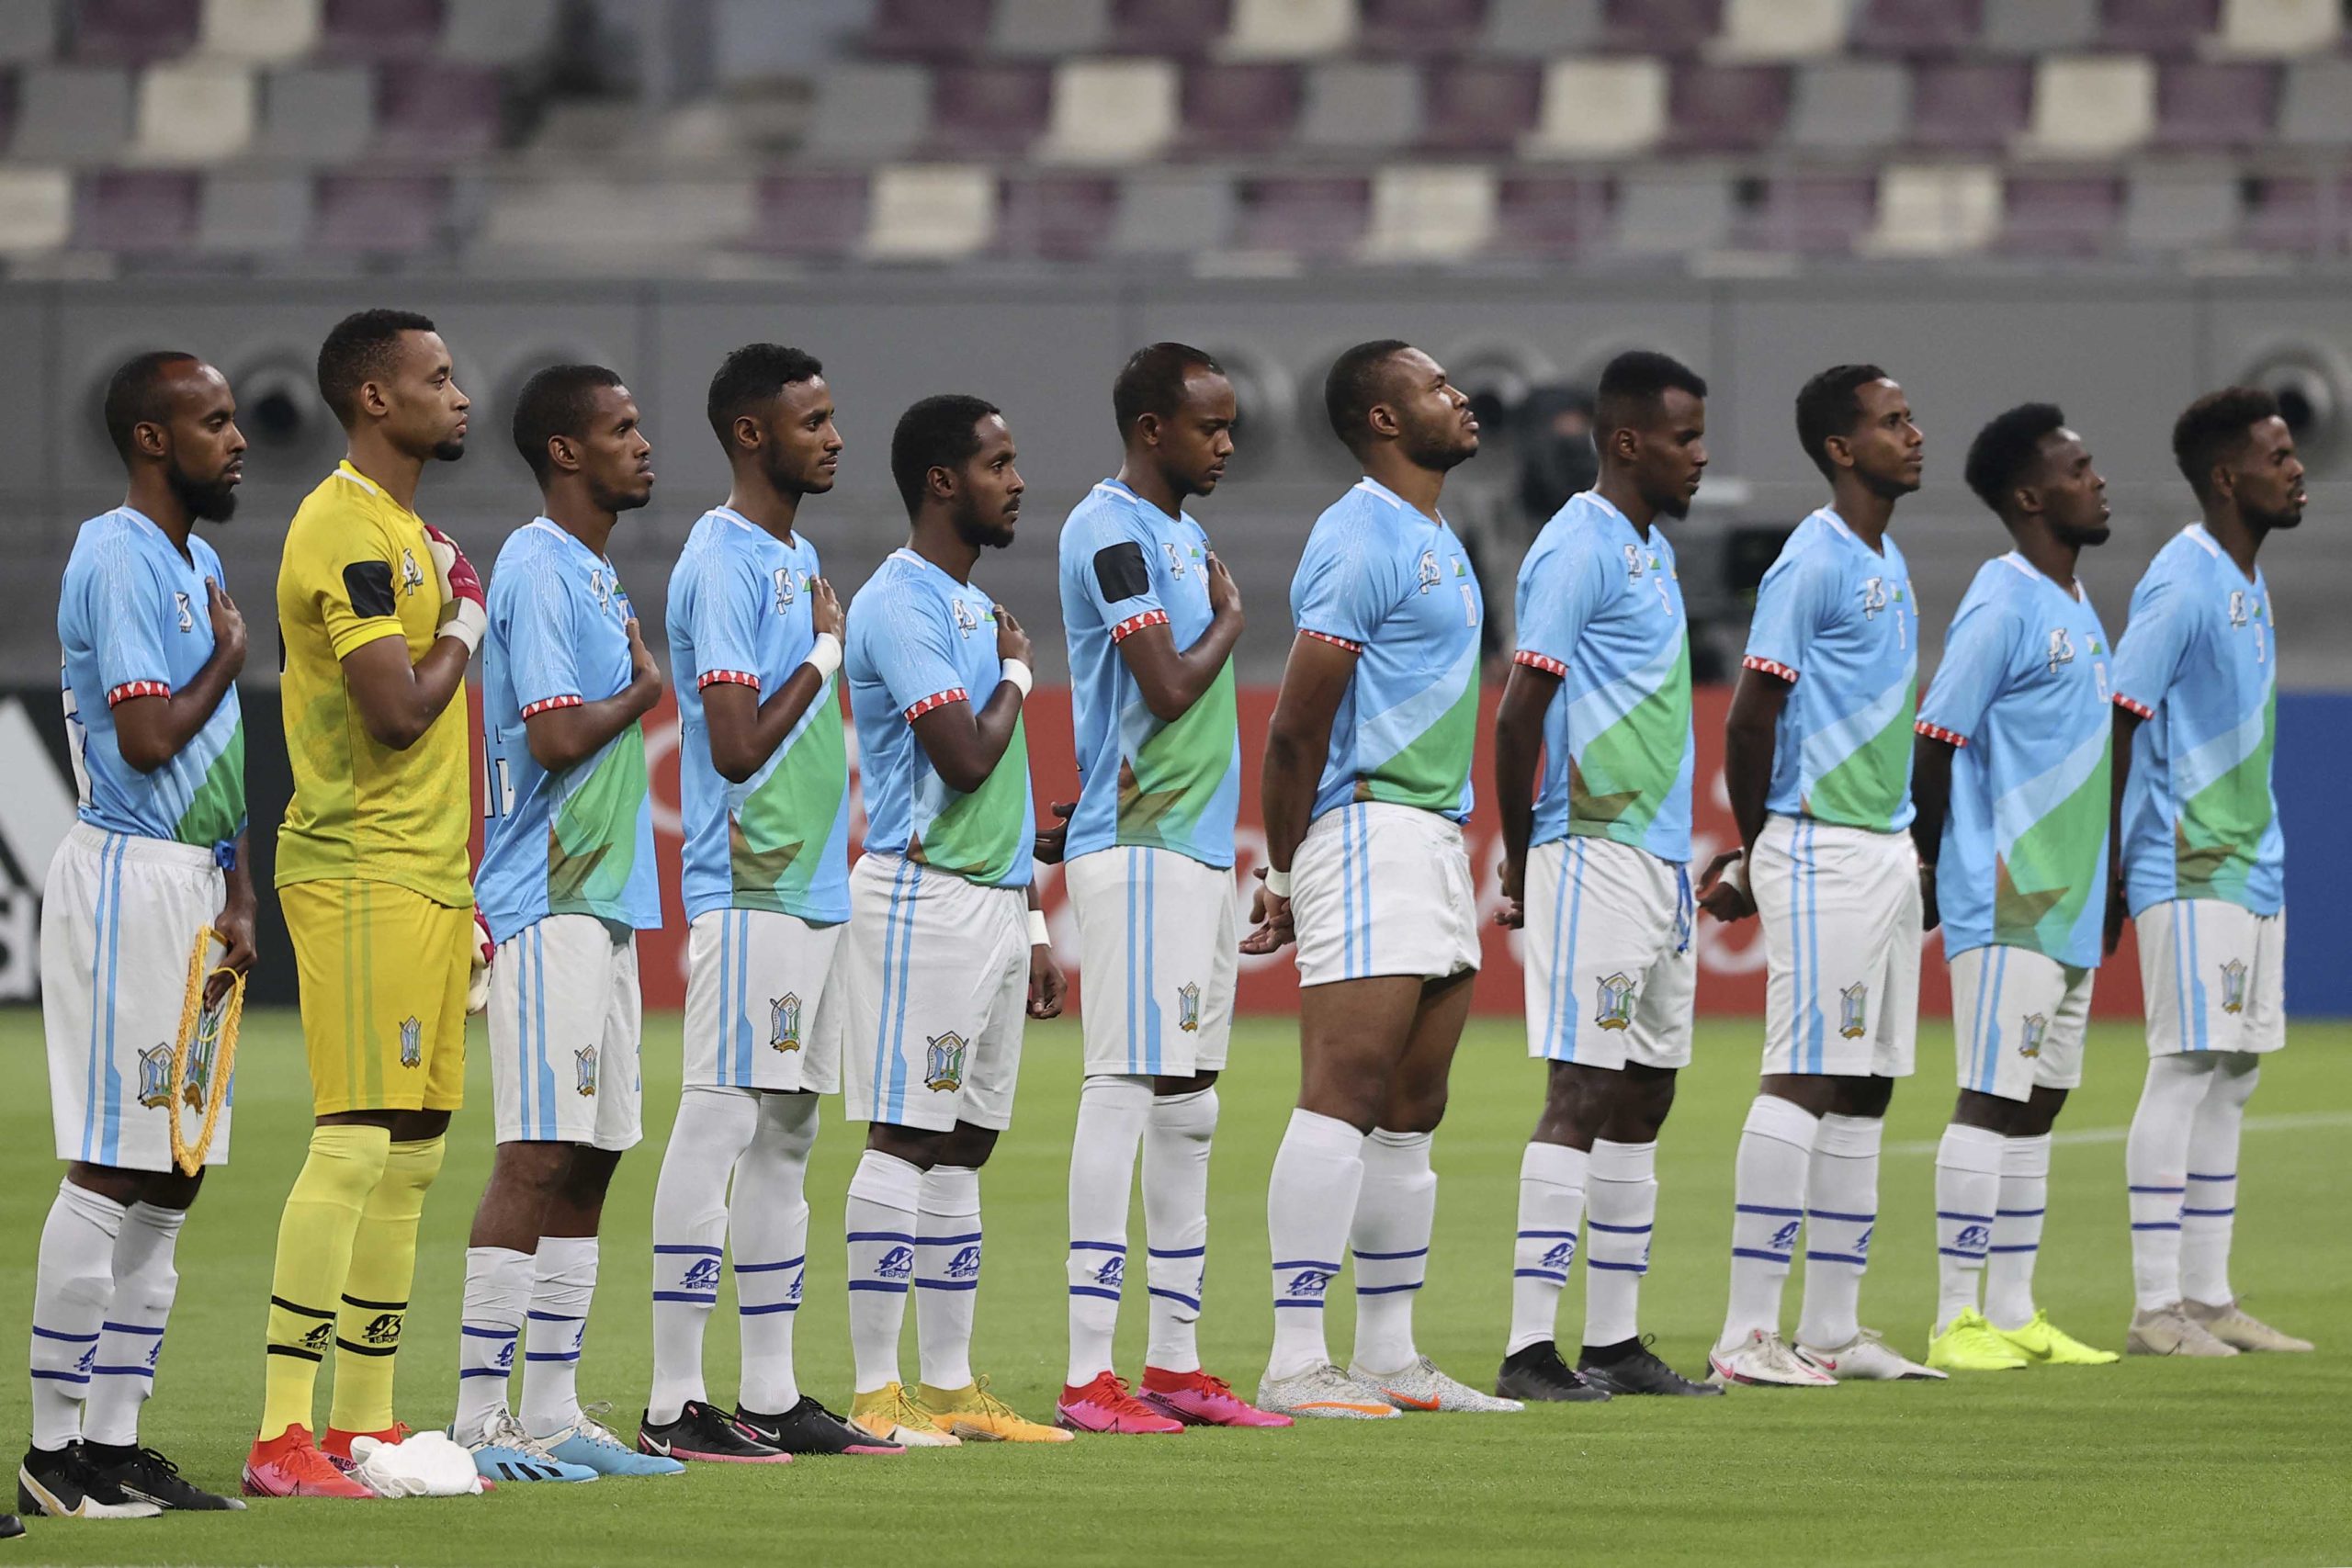 Djibouti National Football Team Squad, Players, Stadium, Kits, and much more